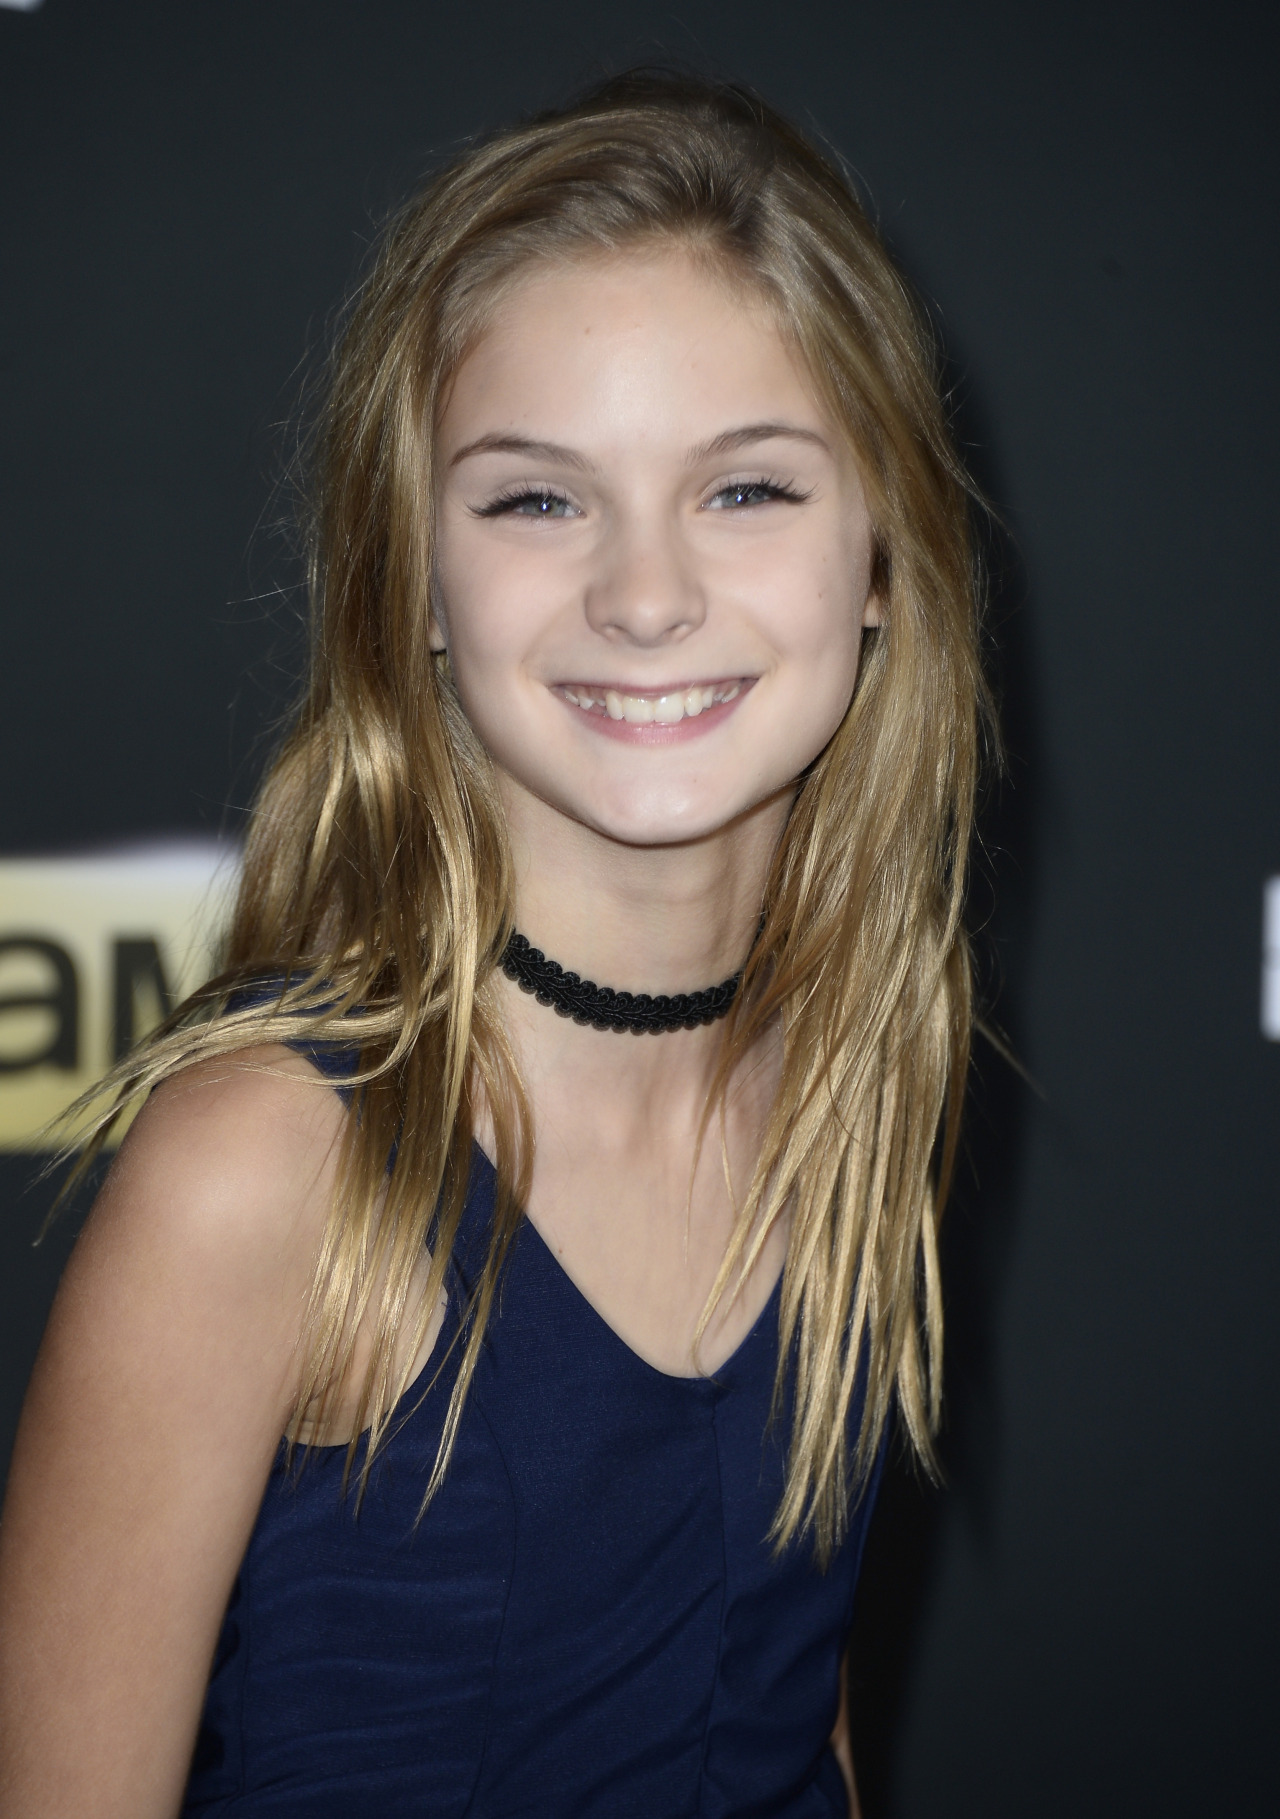 Pictures of Brighton Sharbino, Picture #307285 - Pictures Of ...